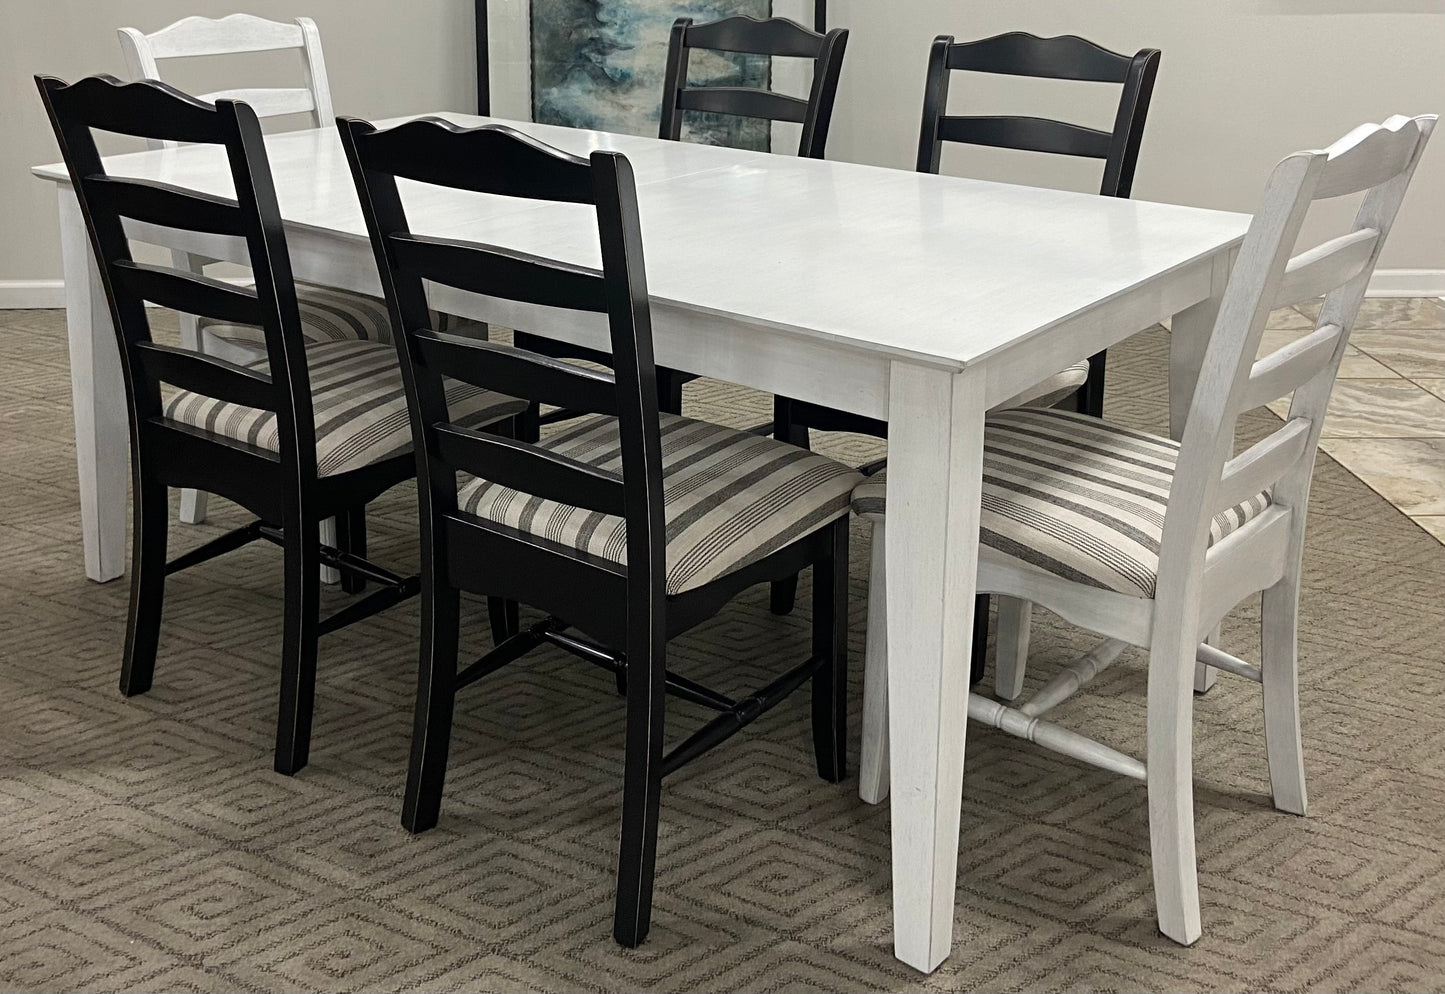 Shaker Extension Table with Magnolia Chairs